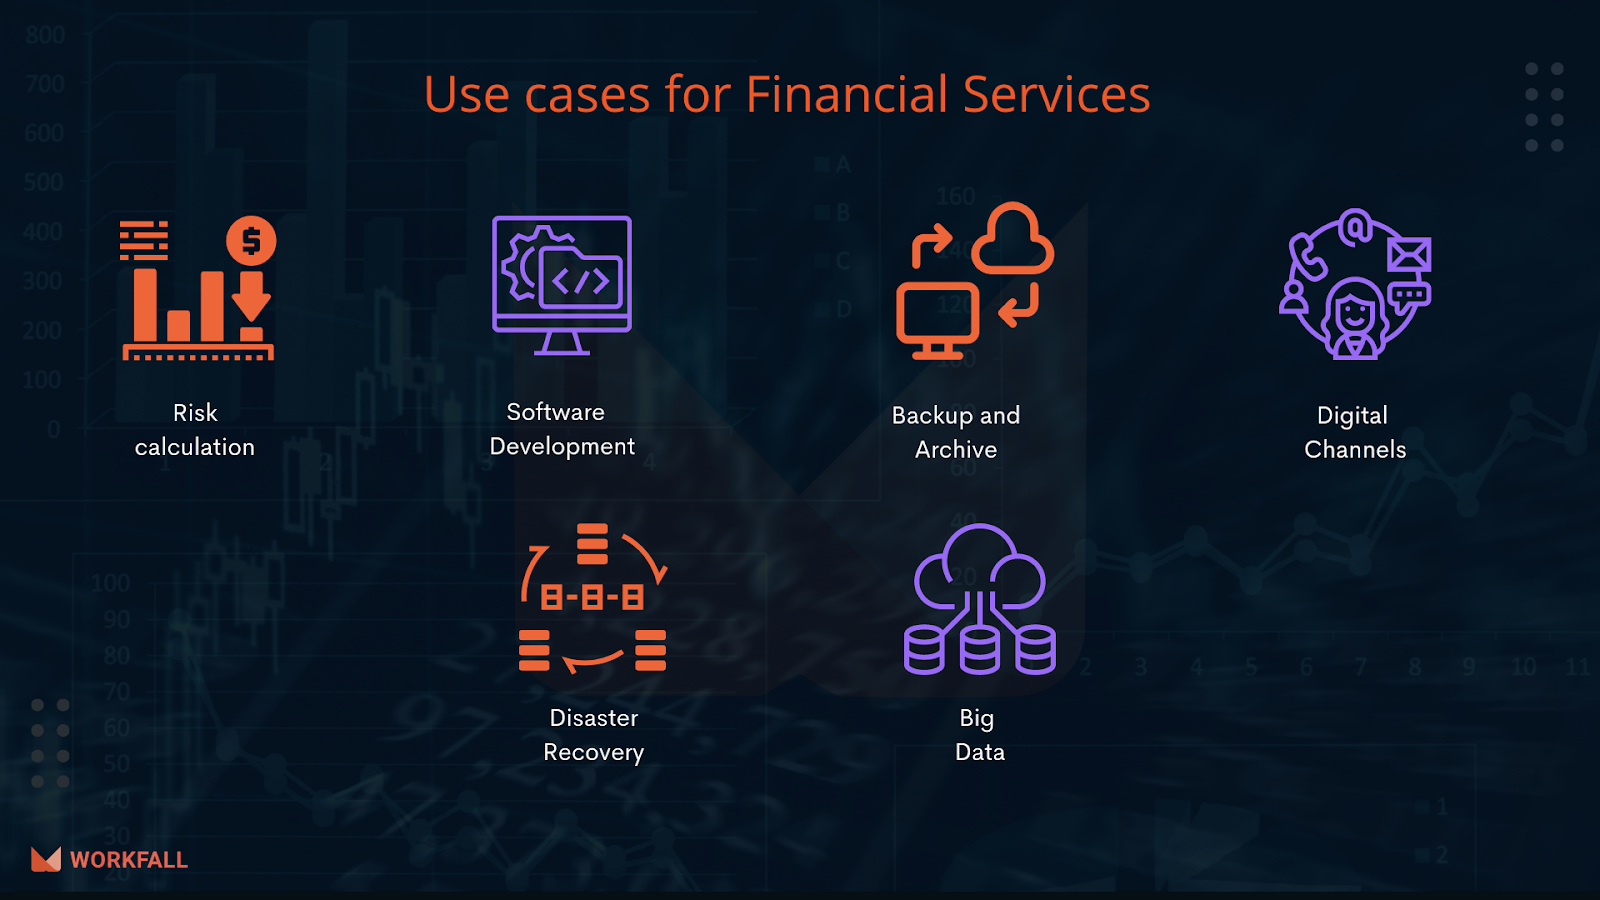 Use cases of Financial Services